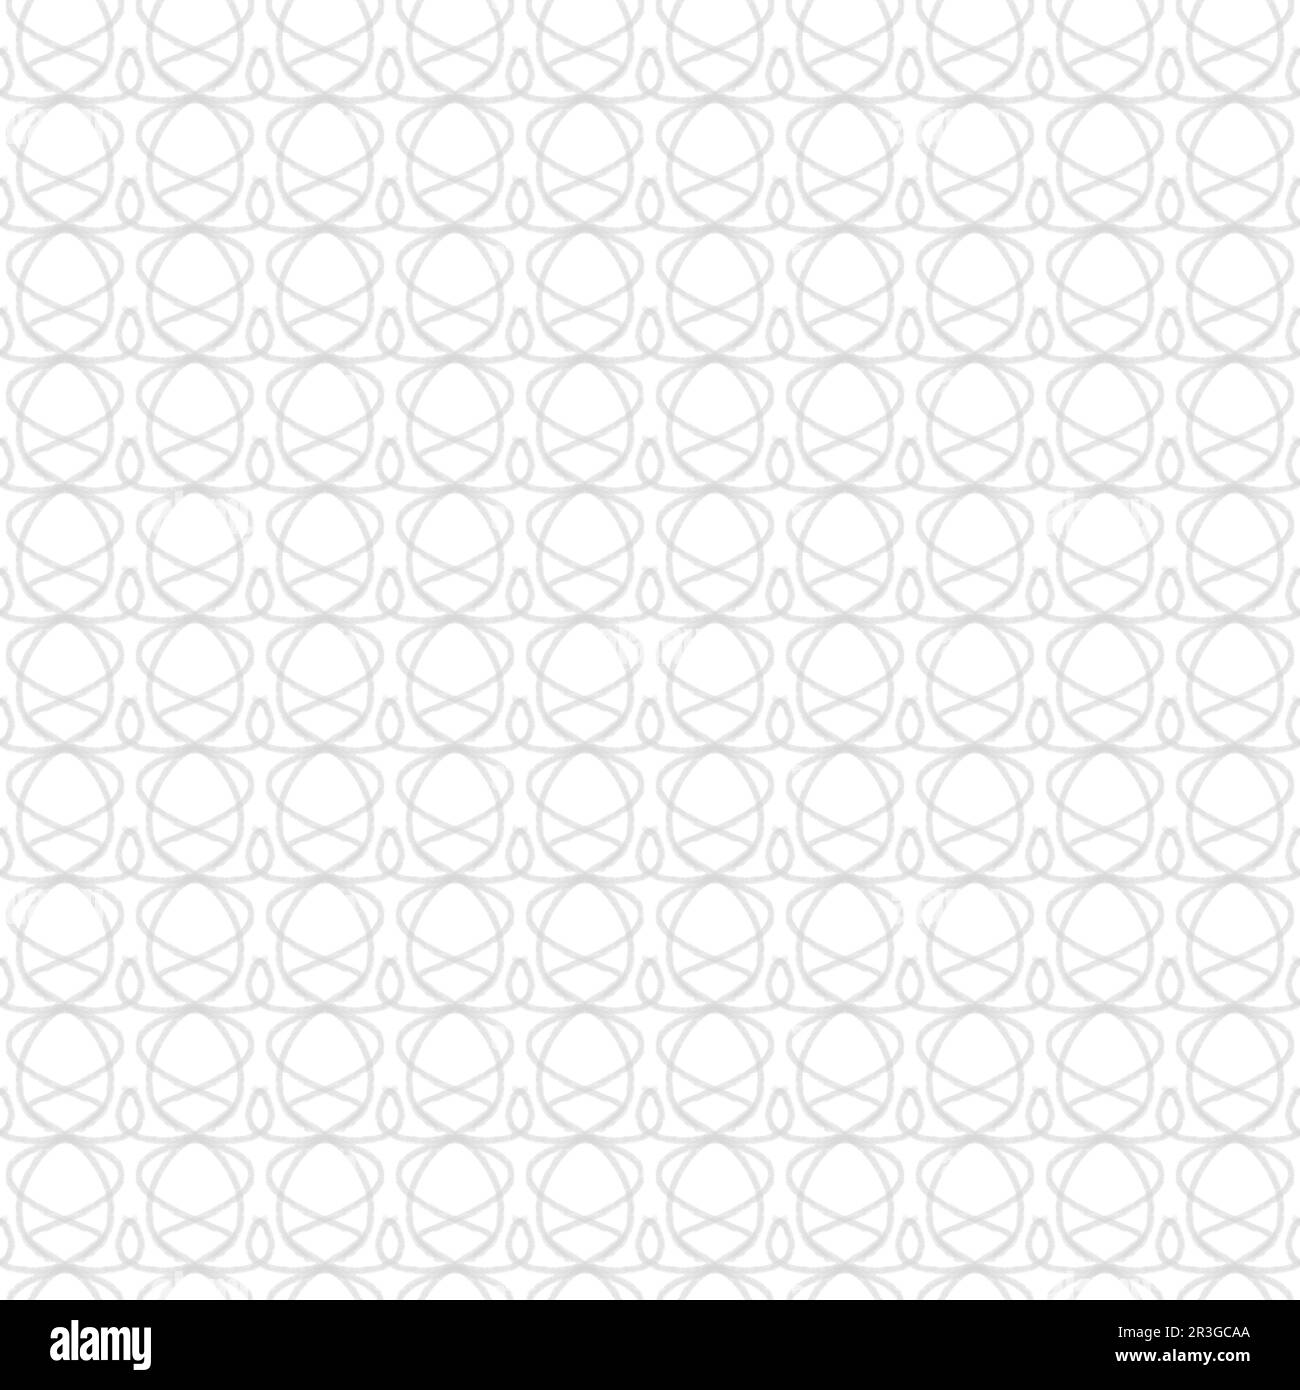 seamless pattern overlapping circles background Stock Photo